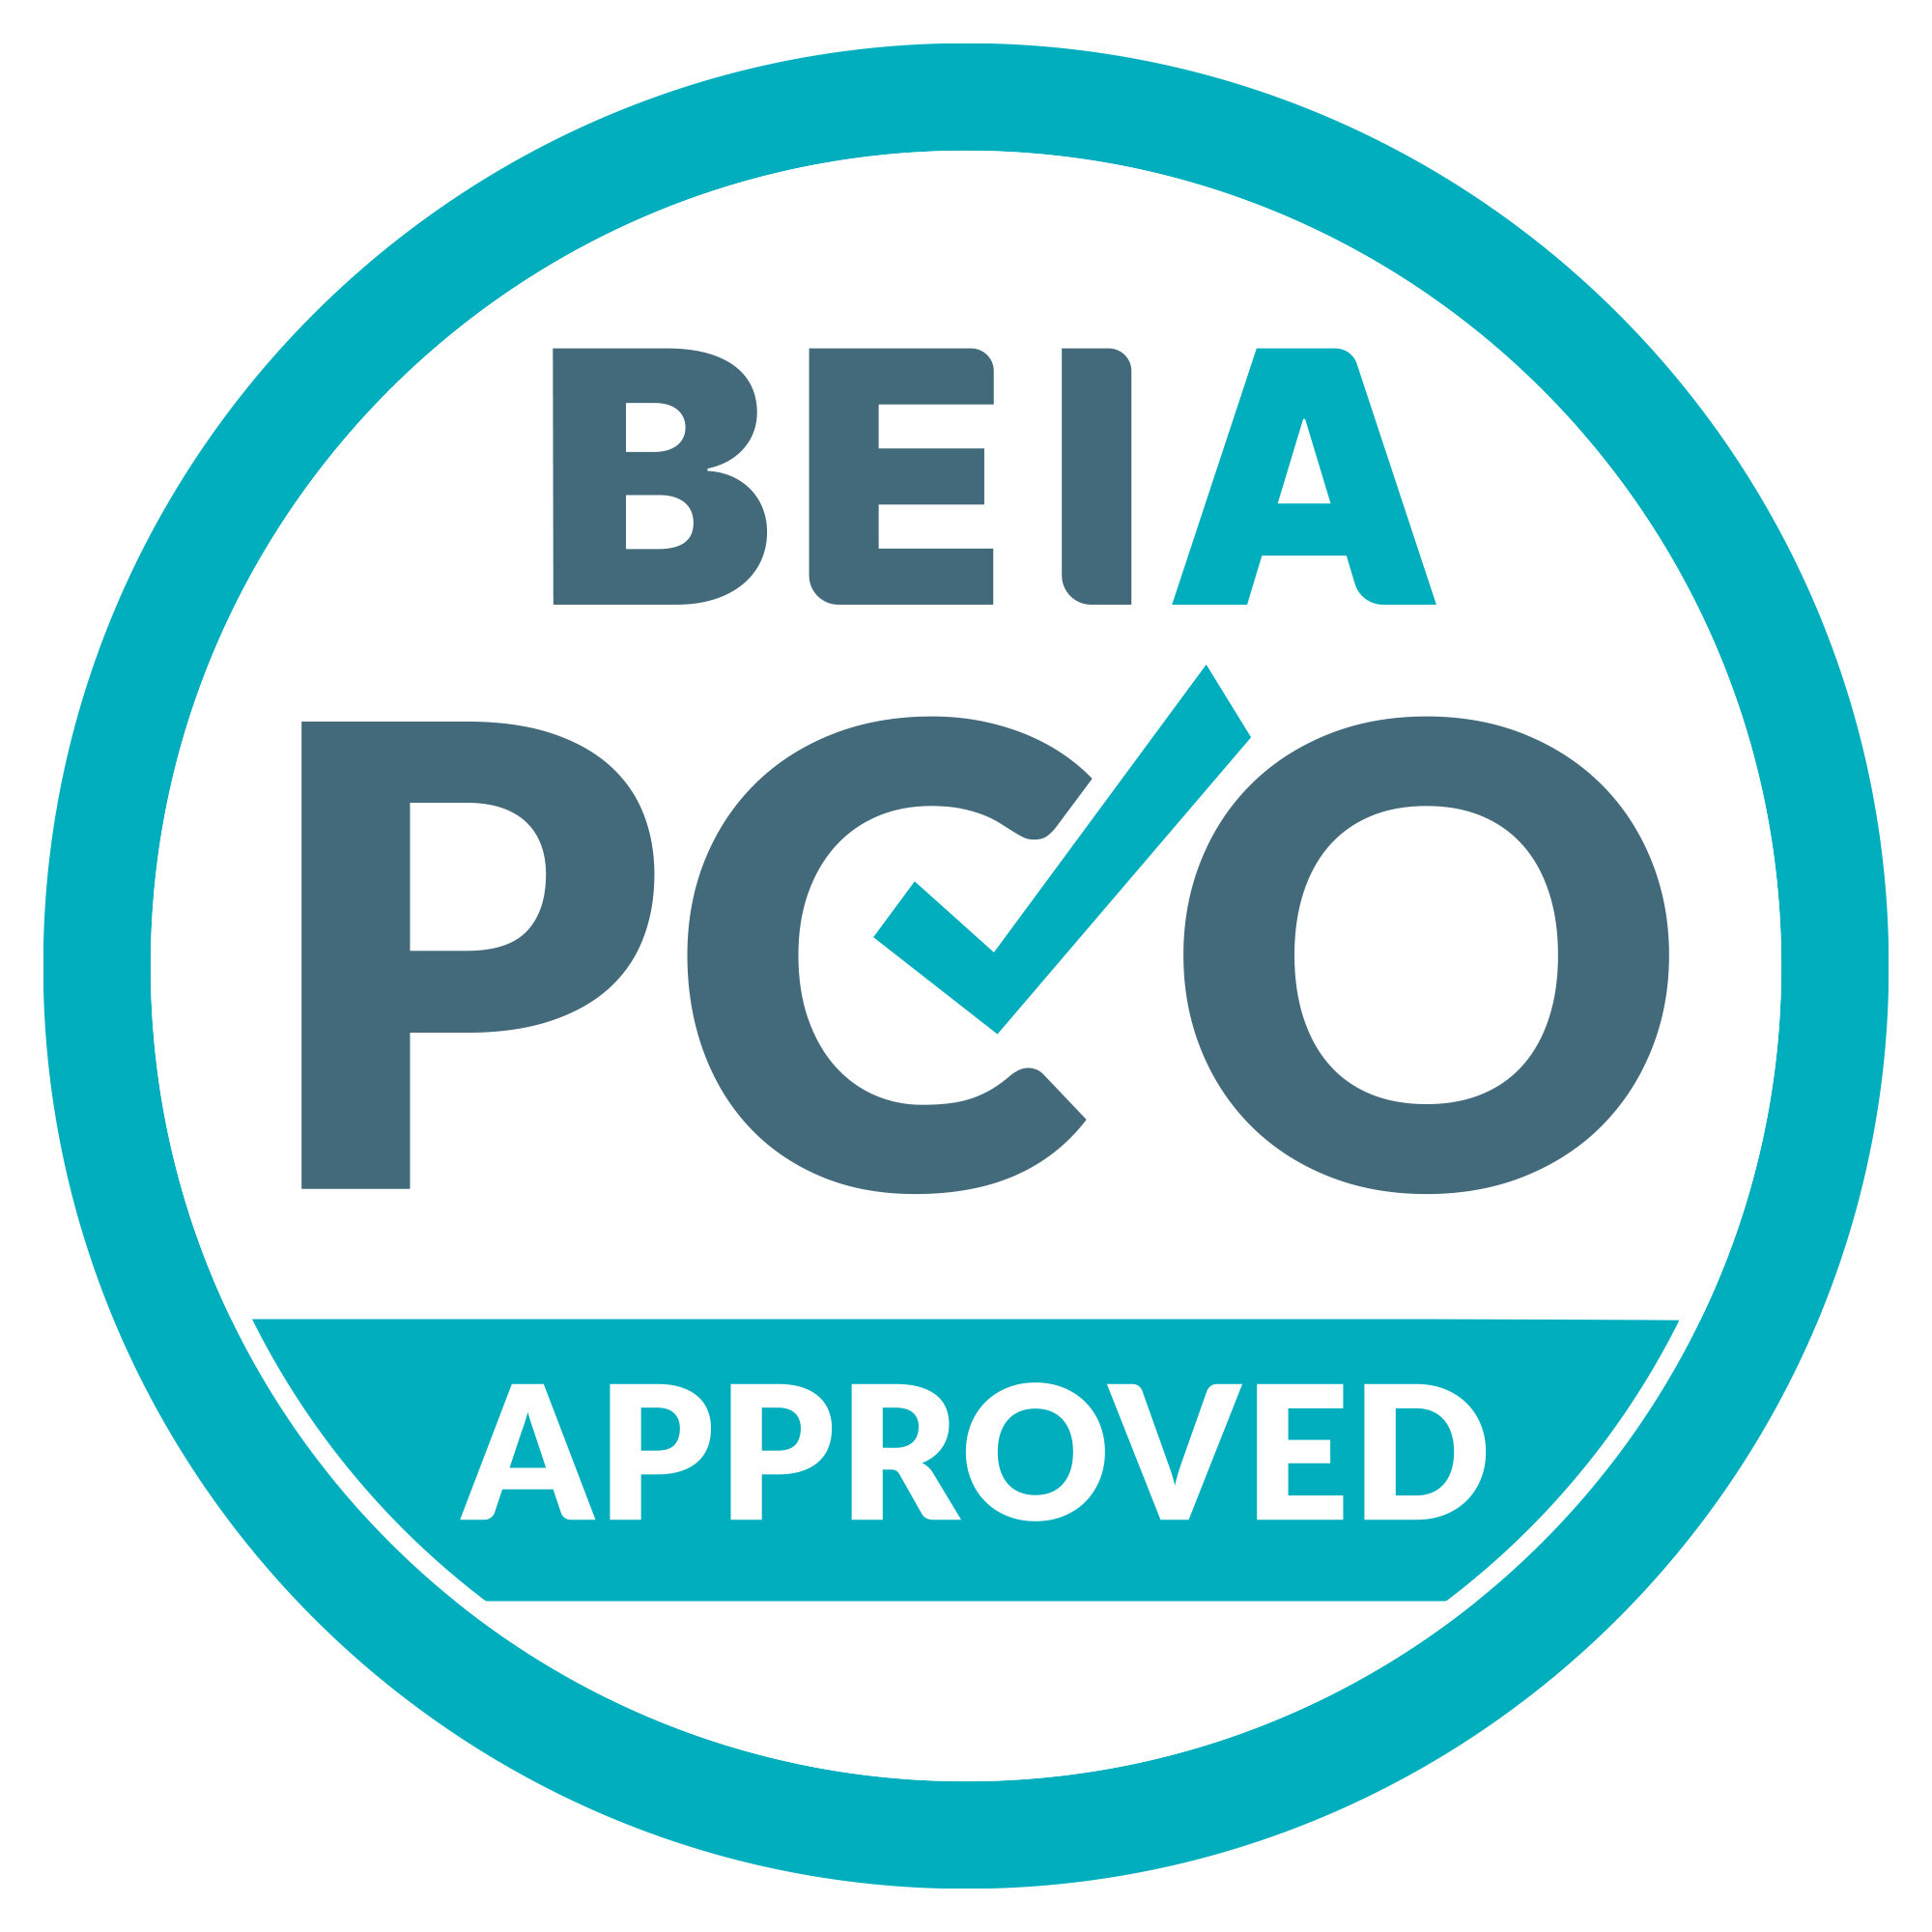 BEIA Approved PCO Logo.jpg